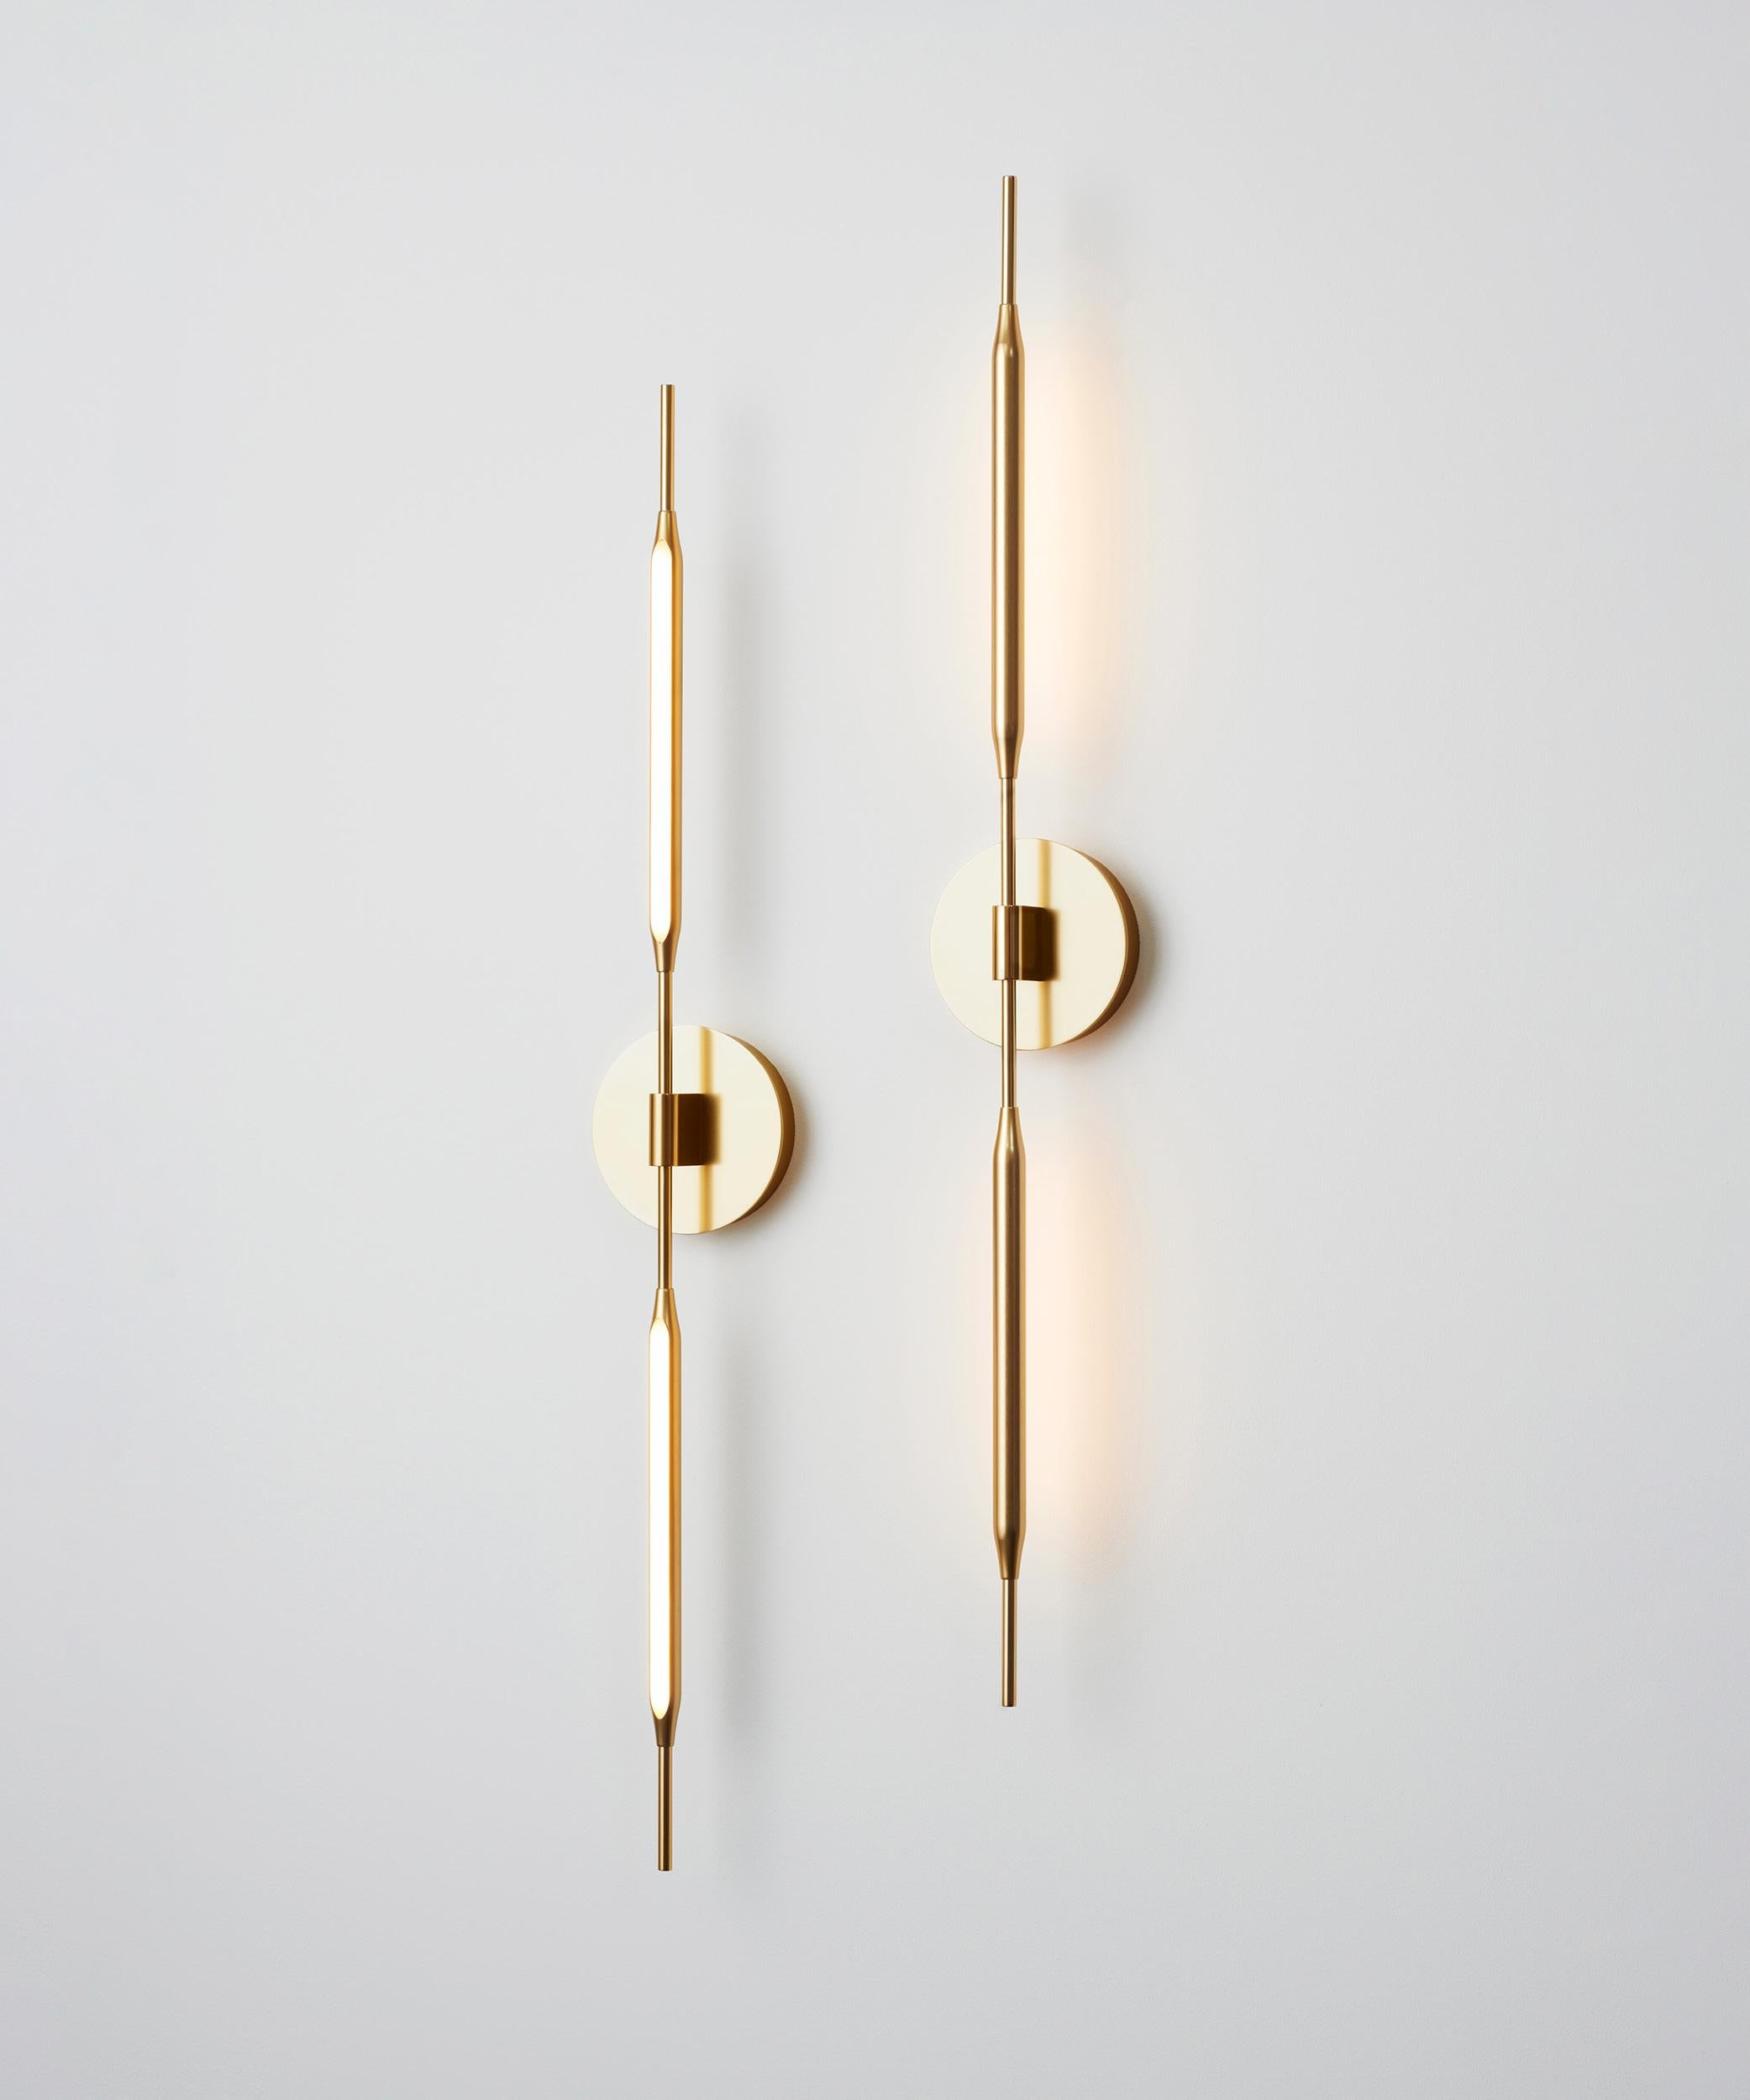 Acrylic Reed Wall Light in Polished Nickel Finish, UL Listed For Sale